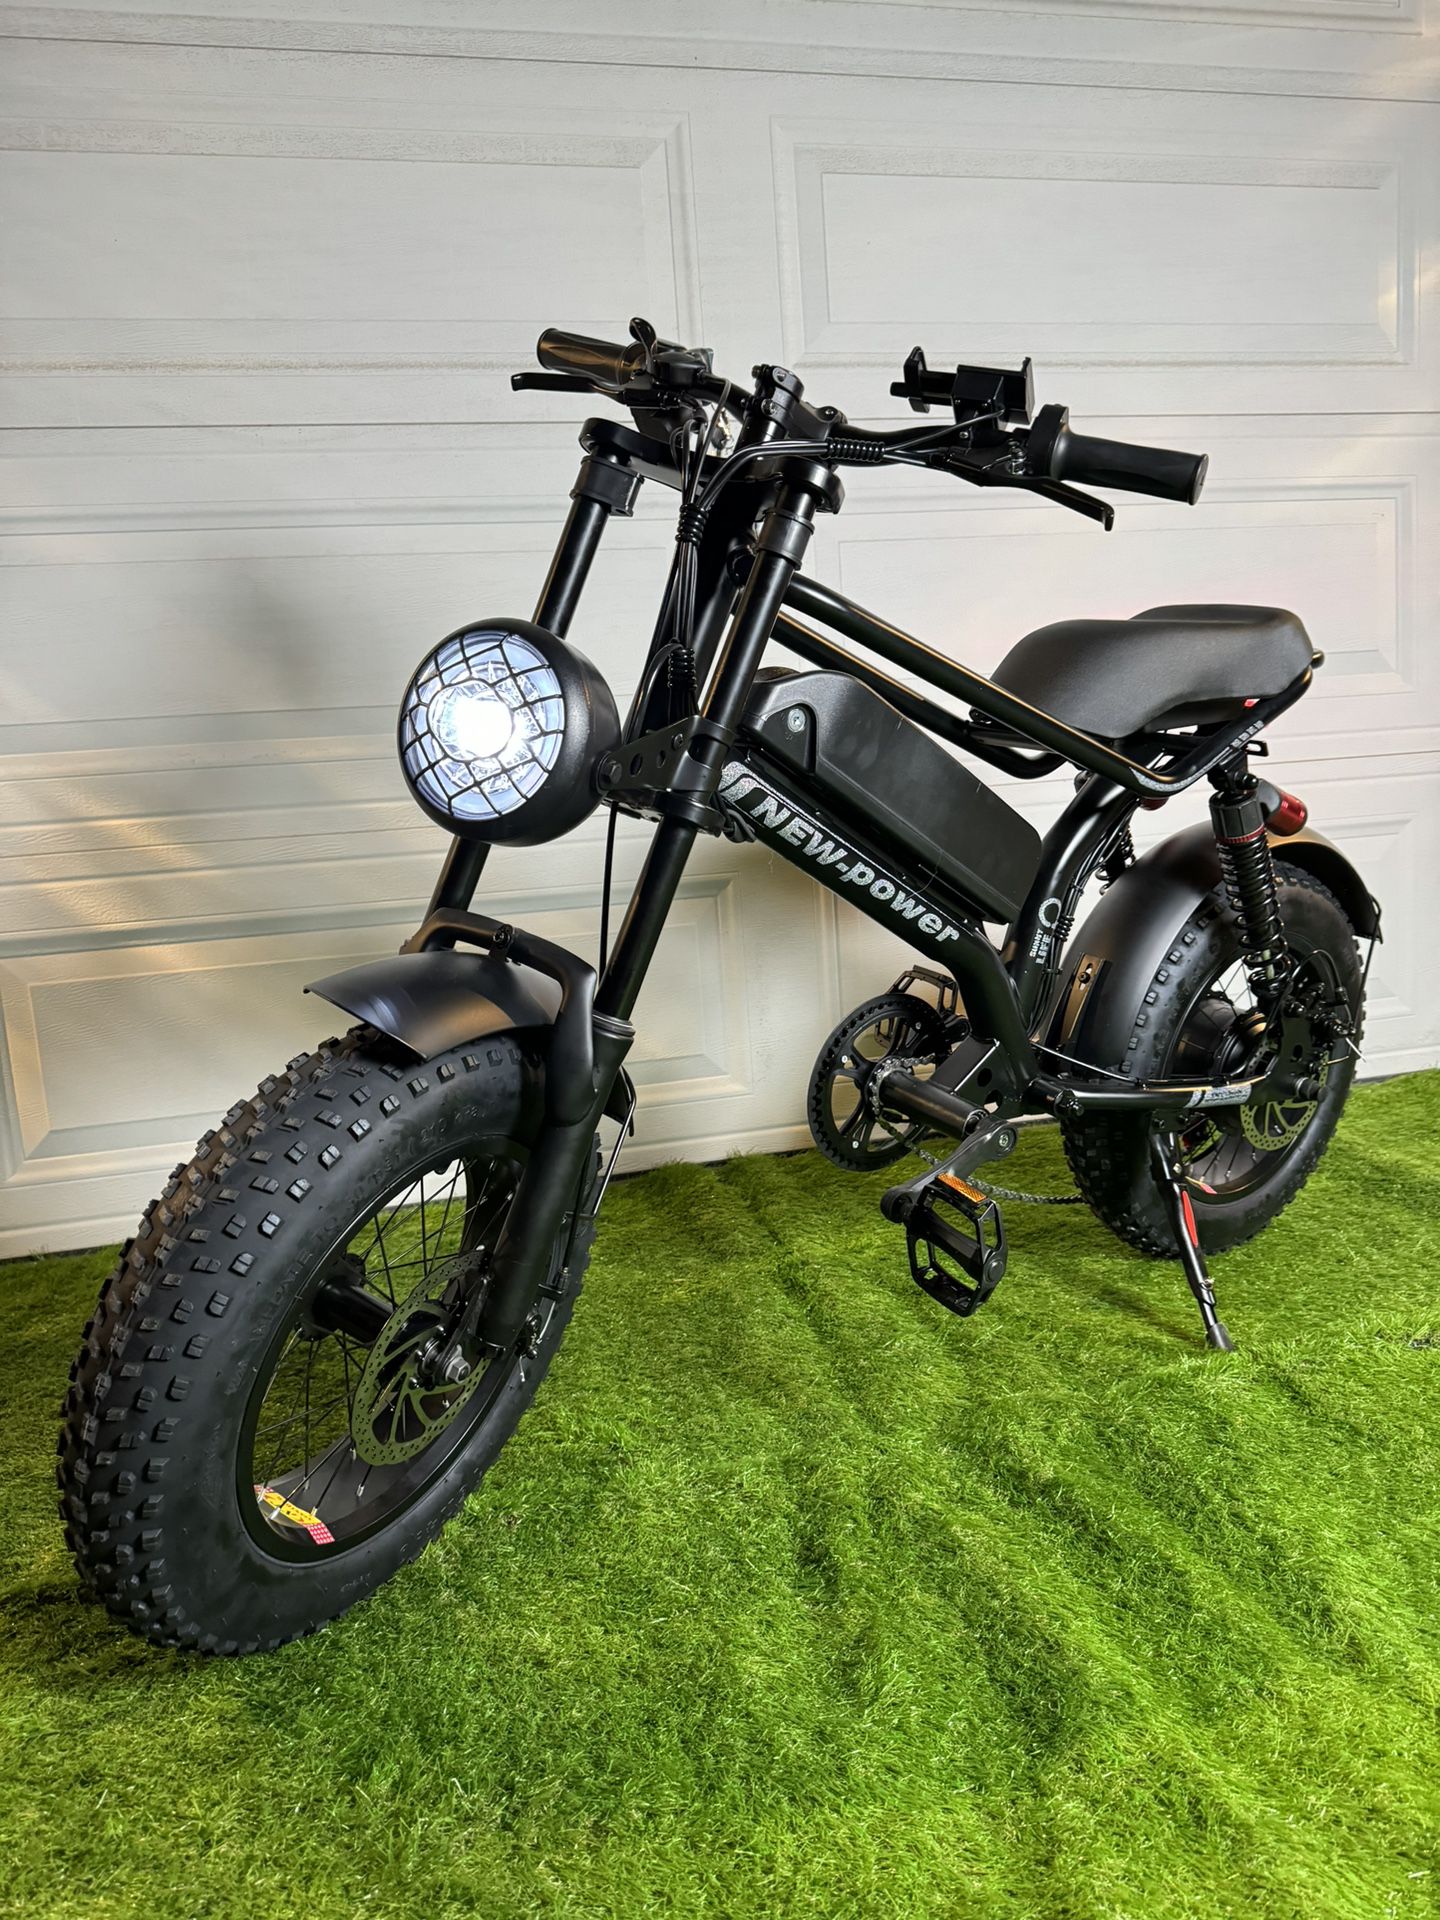 Electric Scooter , Electric Bike , Bicycle, Electric Bicycle For Your Weights 